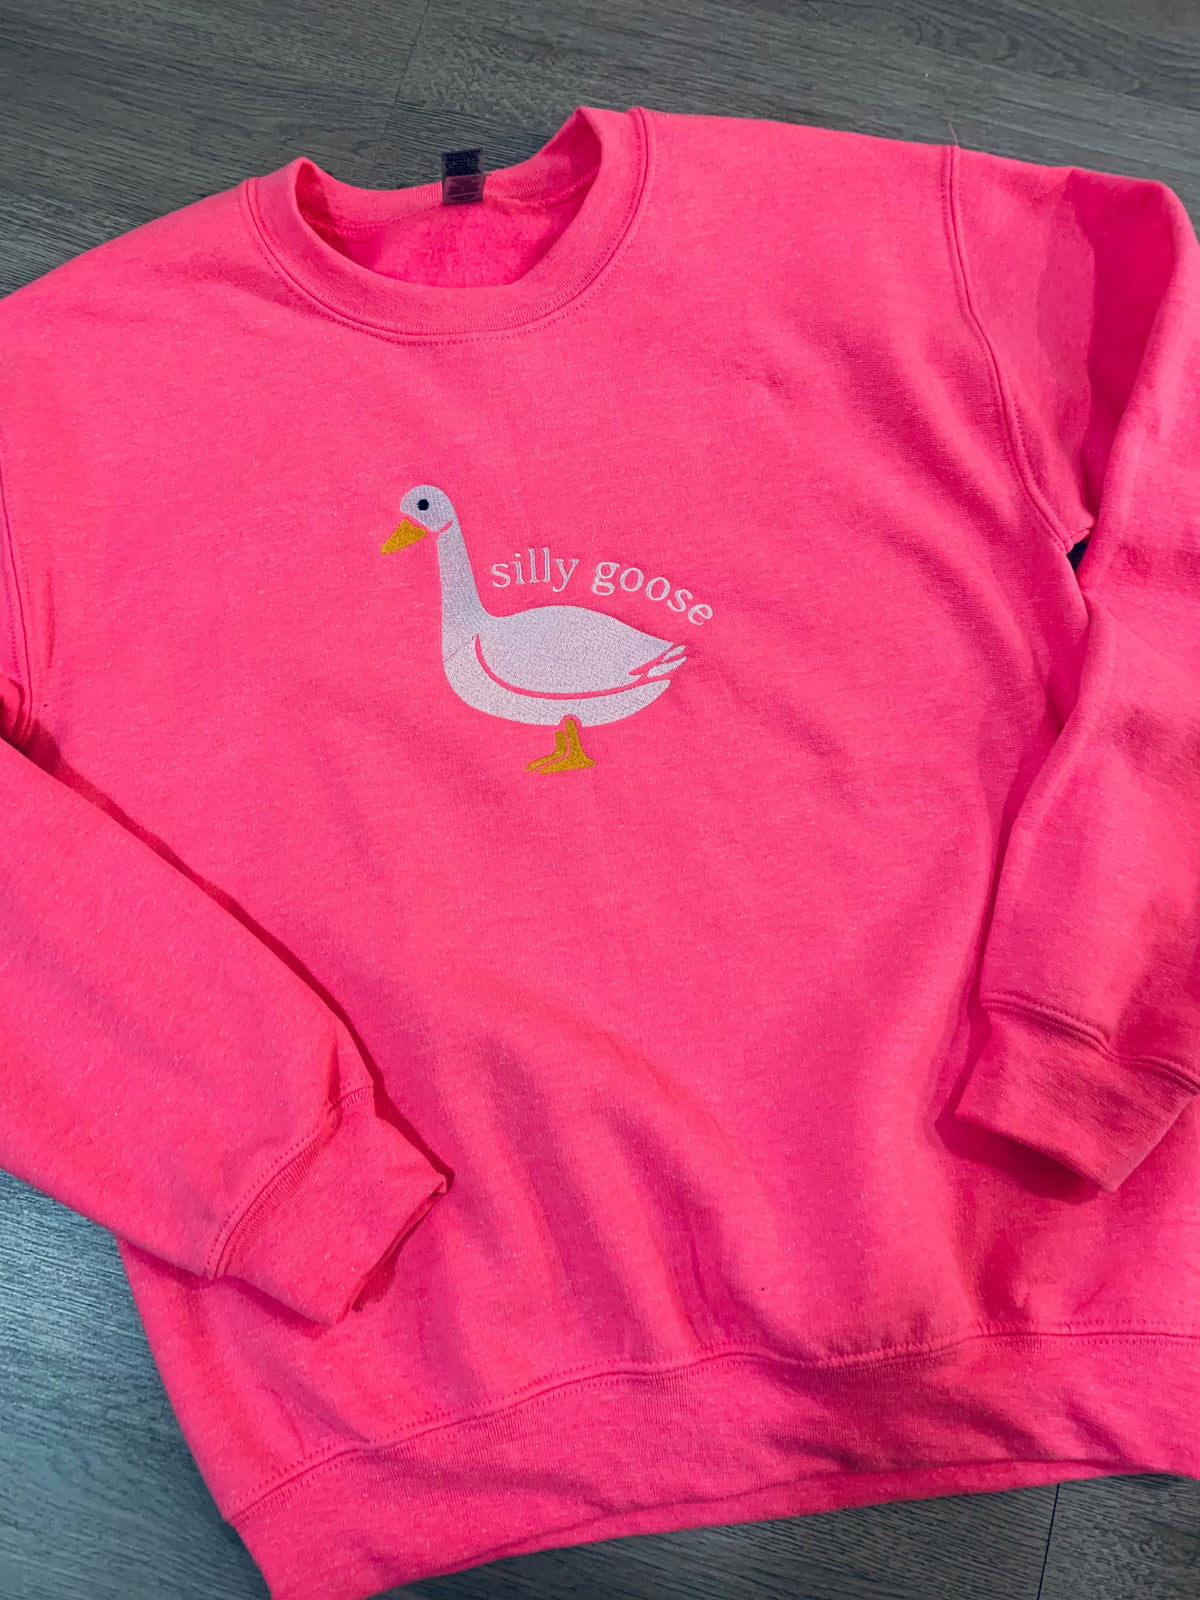 Silly Goose Sweatshirt-243 custom-Peachy Keen Boutique-Peachy Keen Boutique, Women's Fashion Boutique, Located in Cape Girardeau and Dexter, MO